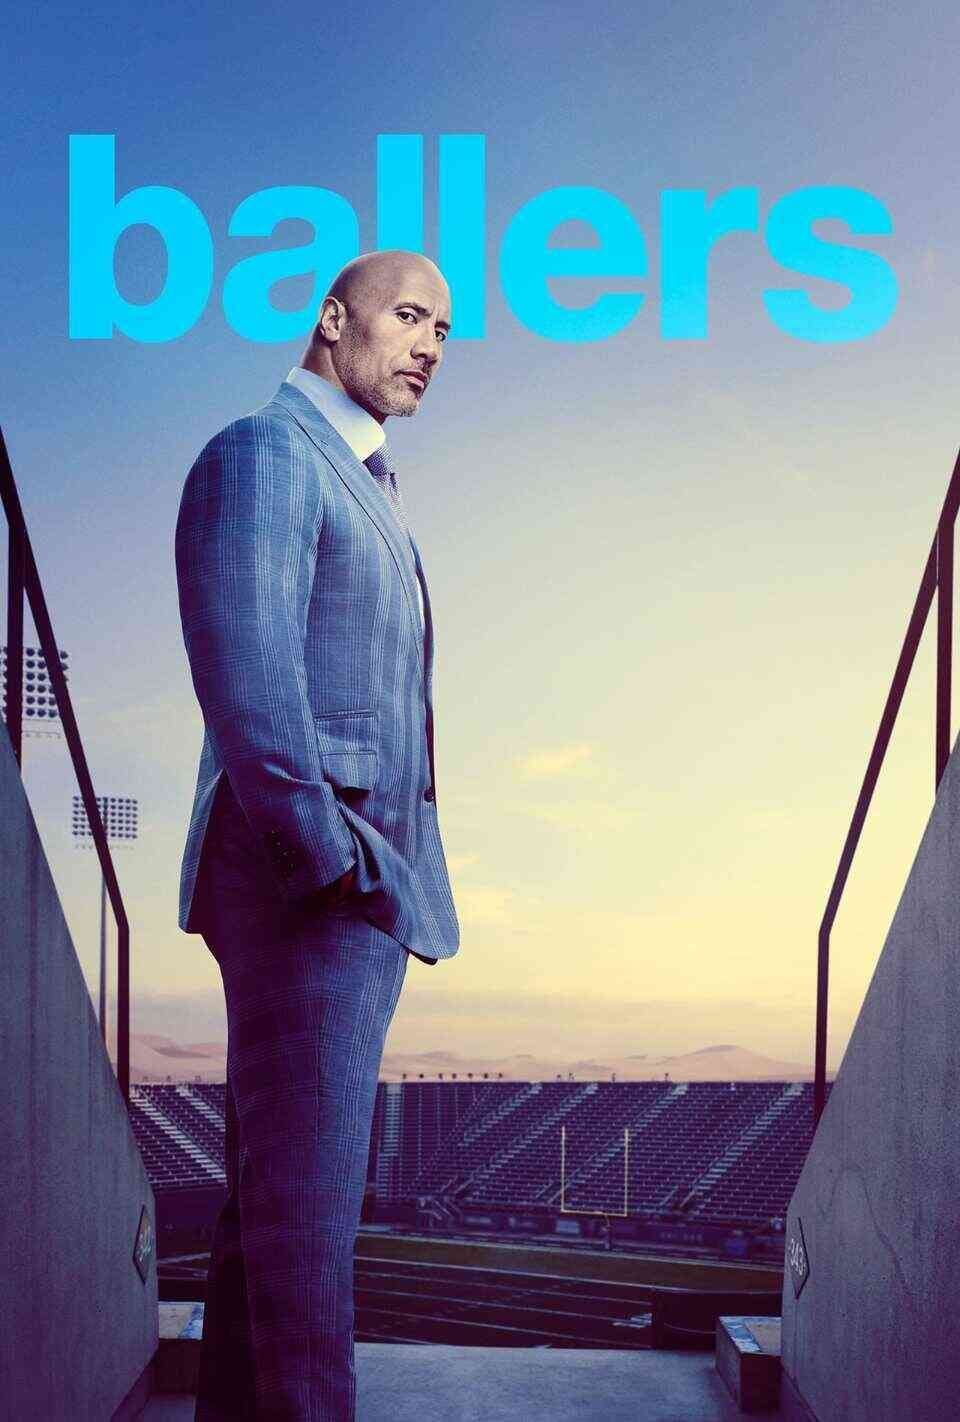 Read Ballers screenplay (poster)